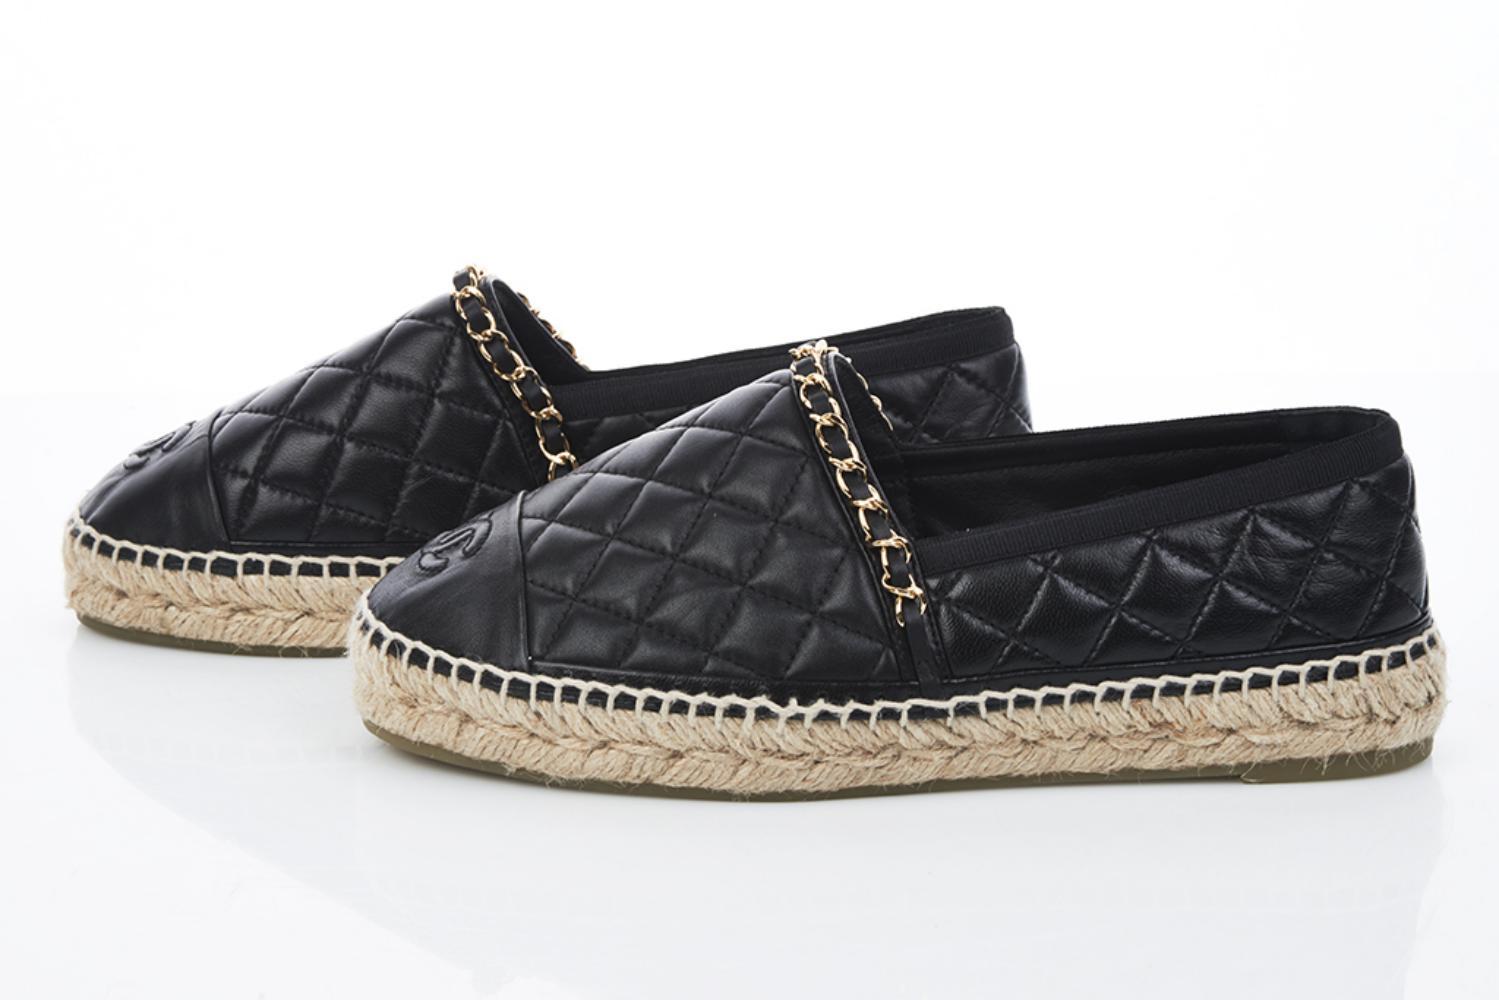 Espadrille season has arrived - here's how to wear them now